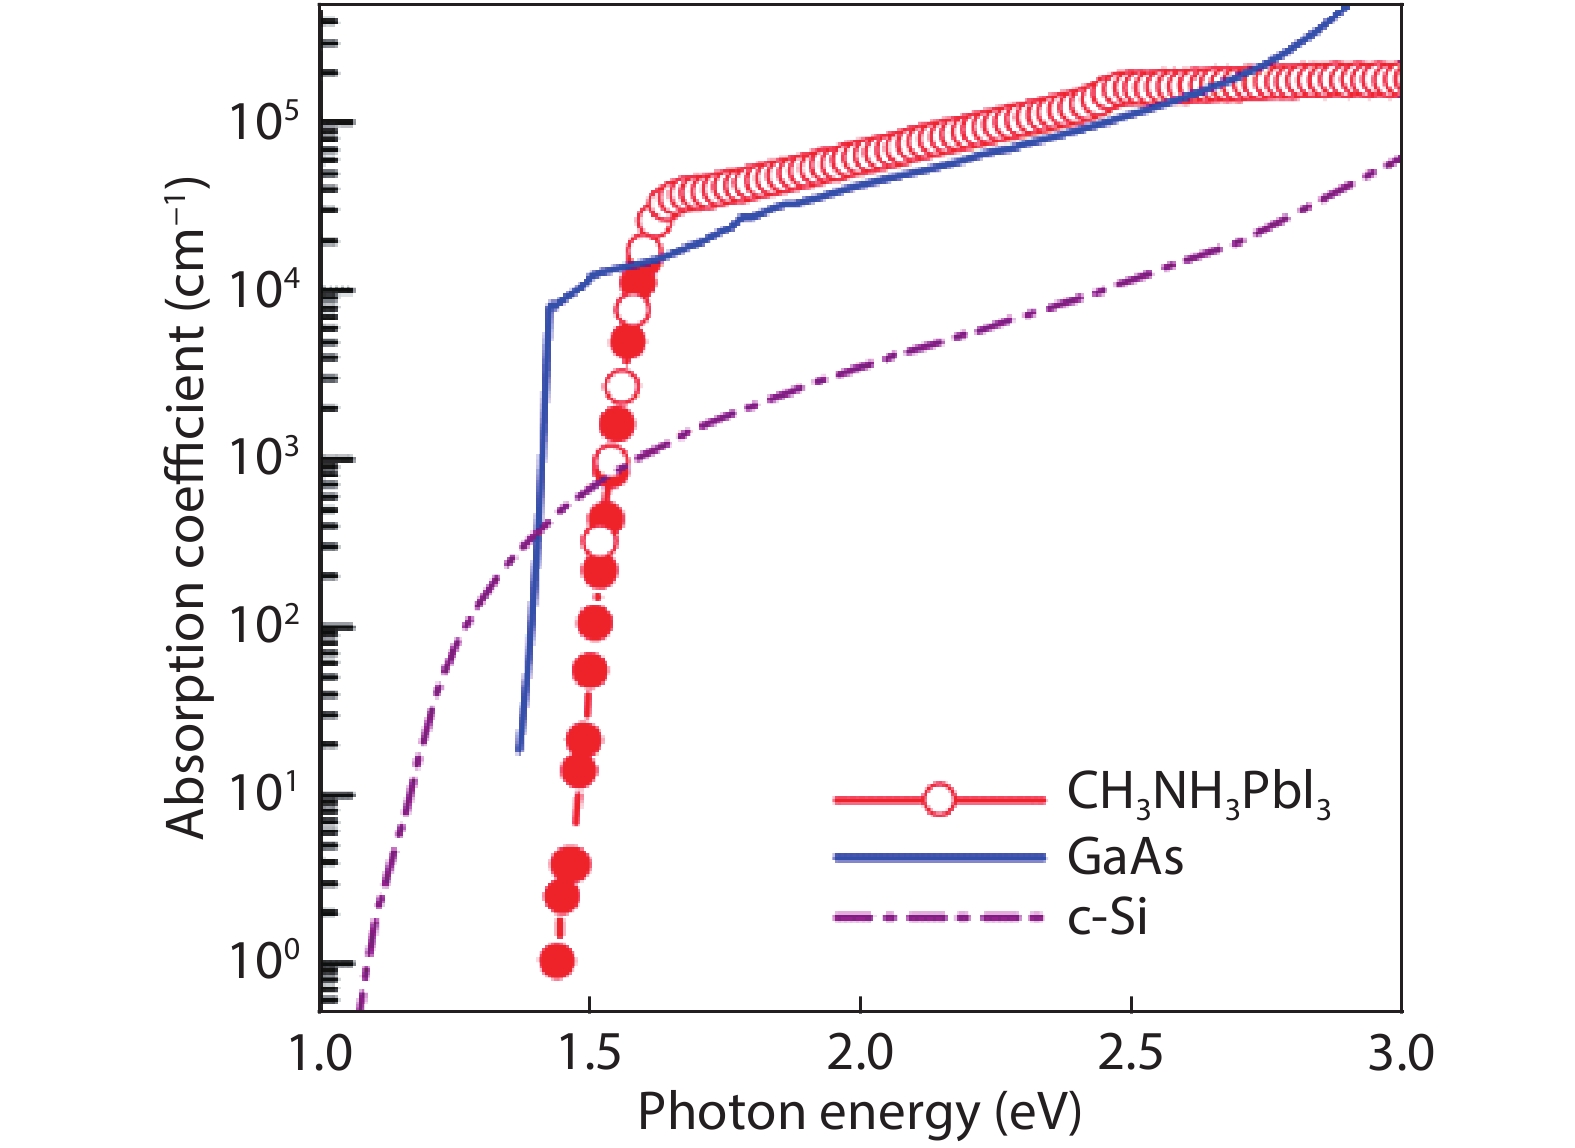 (Color online) Absorption coefficients over photon energy for perovskite, GaAs, and single crystal silicon[8].